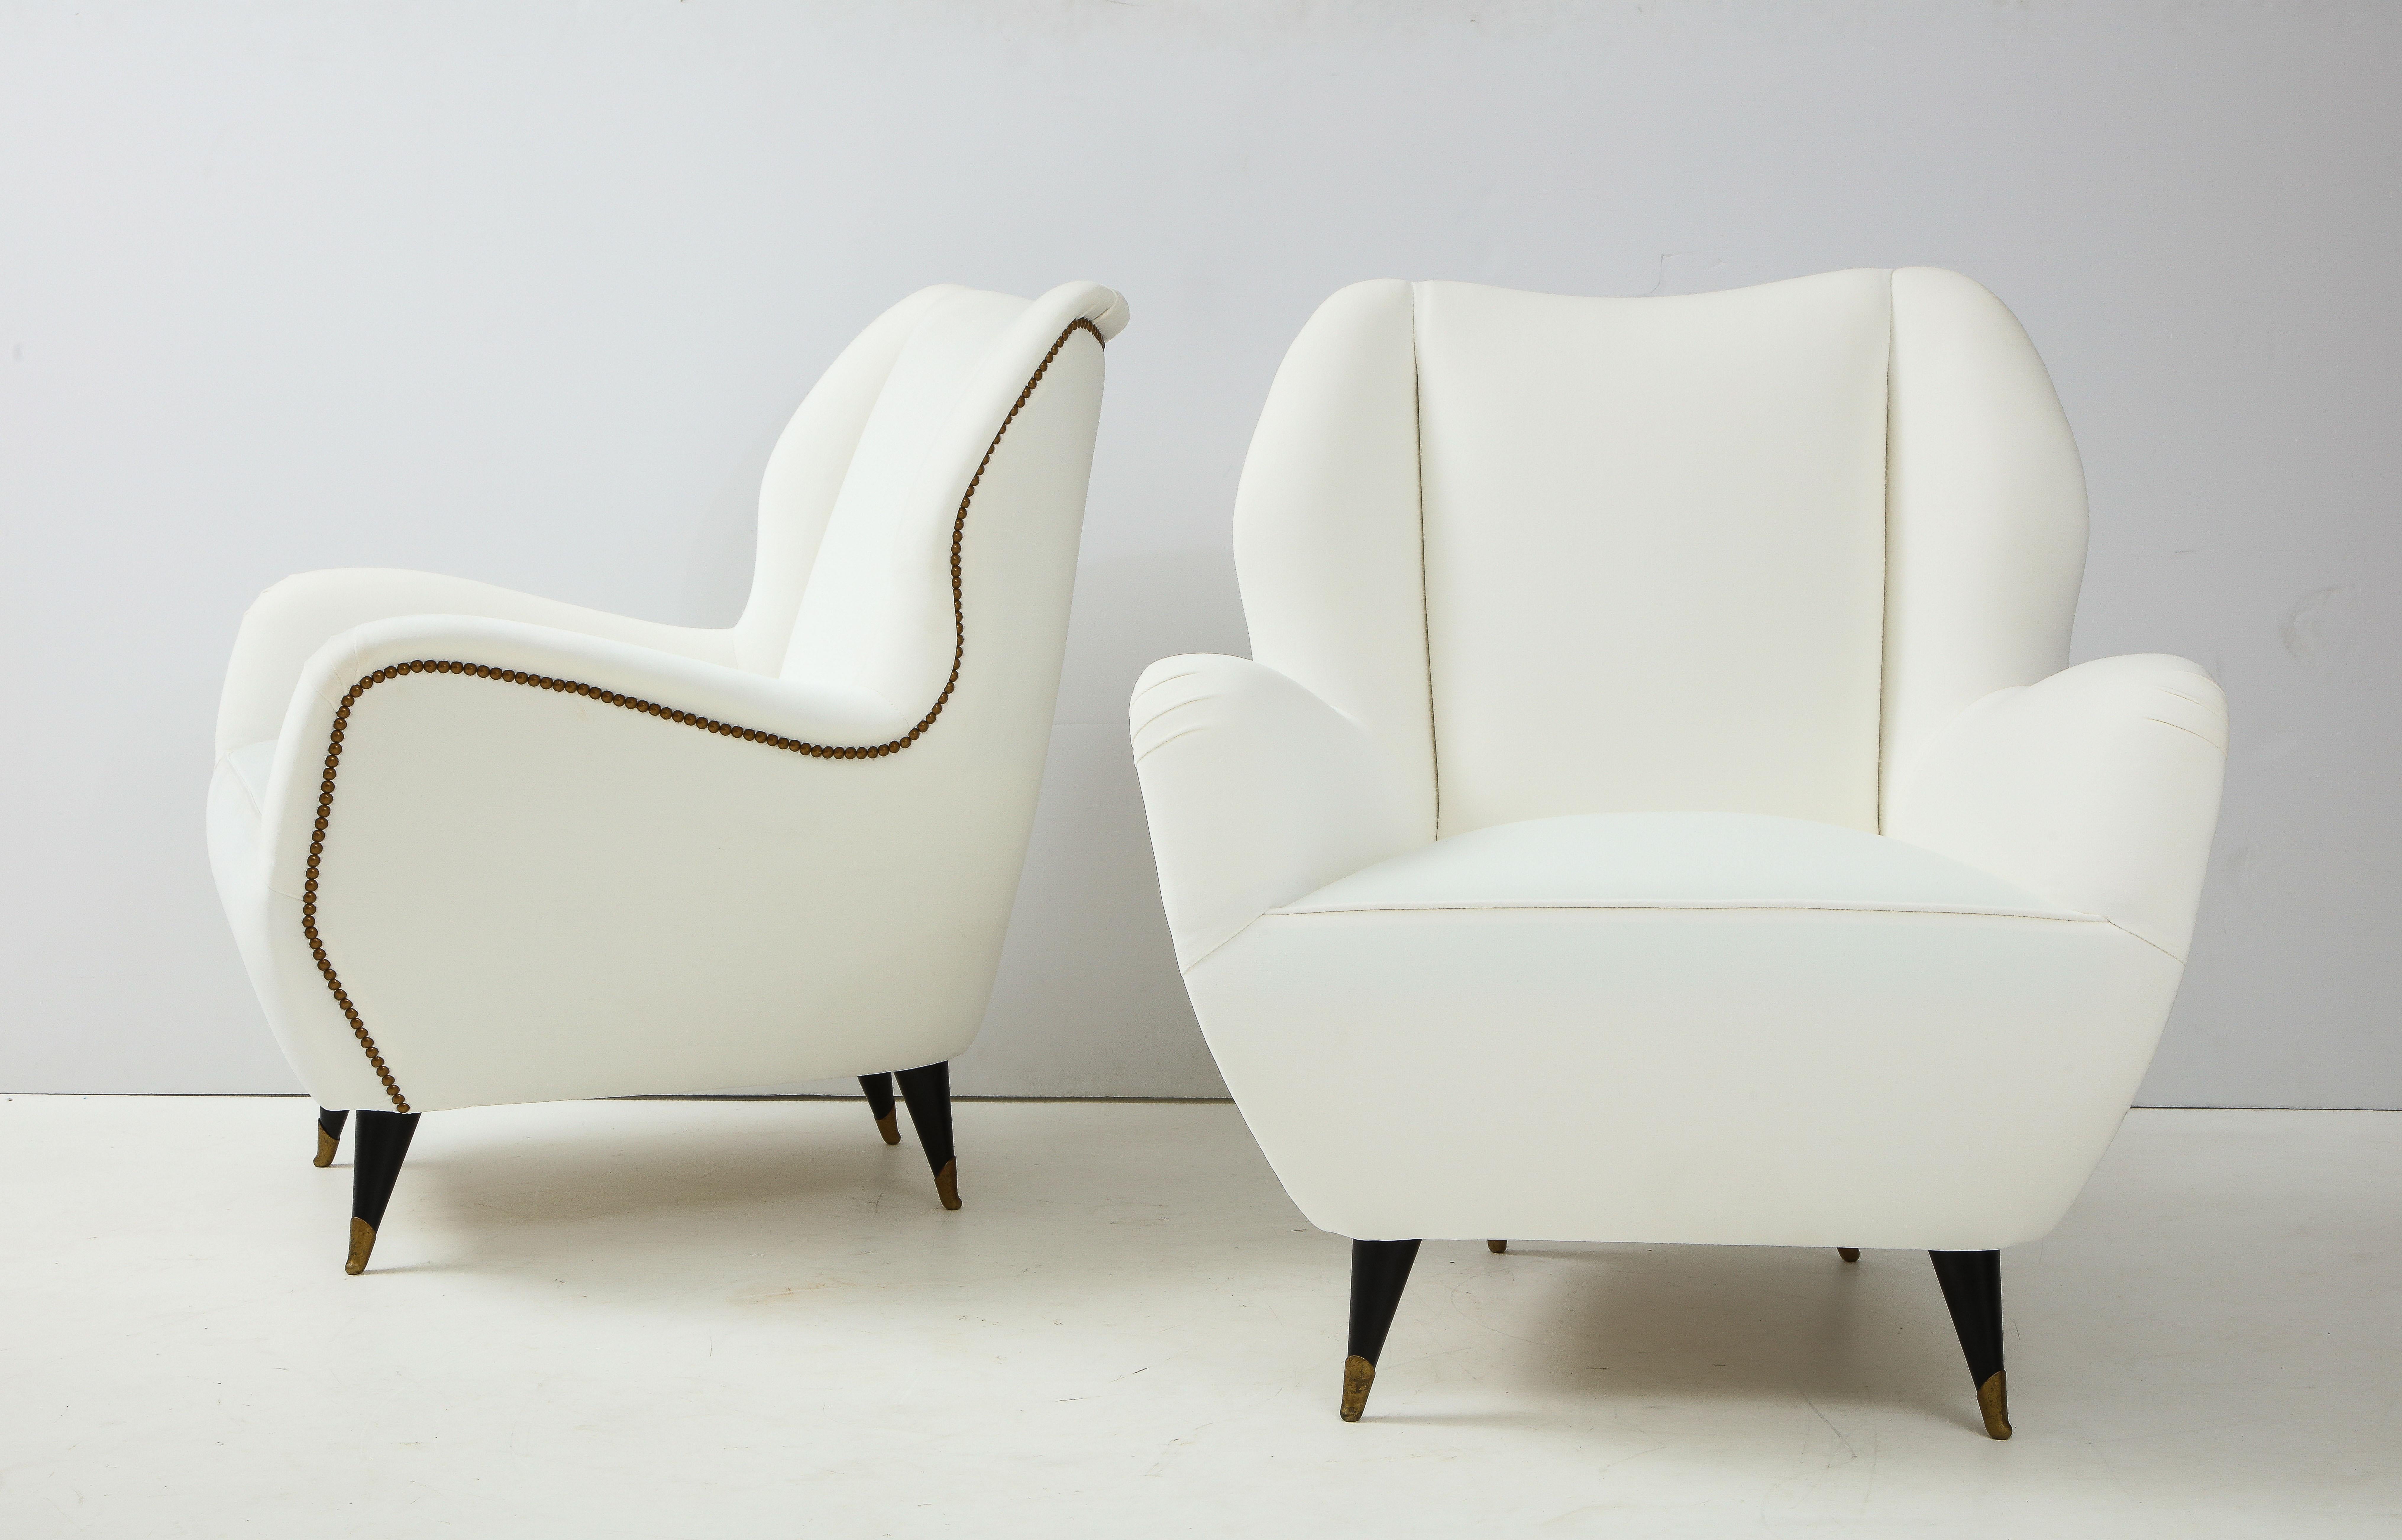 Pair of Sculptural Italian Vintage Lounge Chairs, Attributed to Gio Ponti For Sale 3